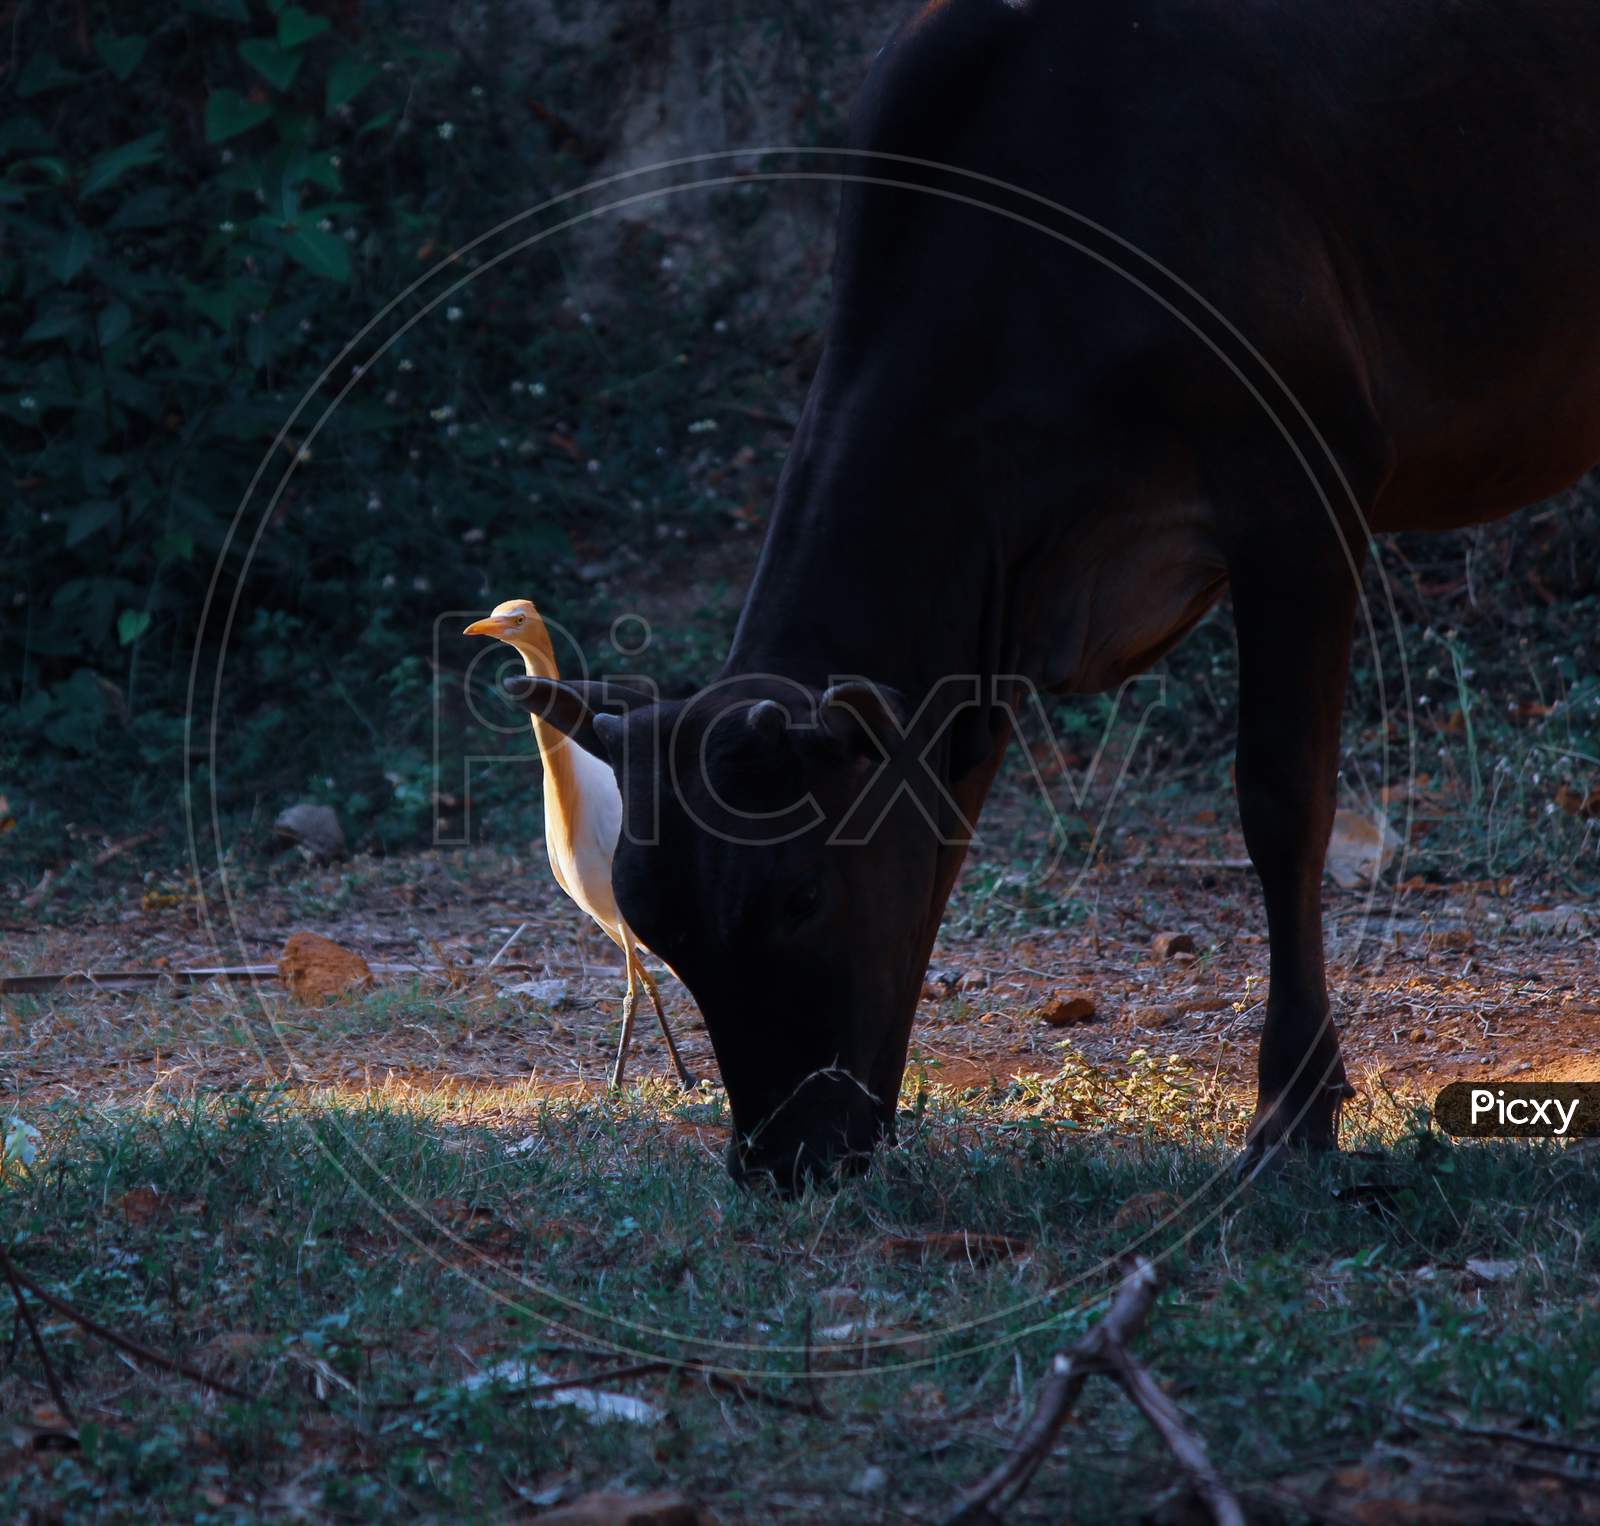 Caatle egret with the cow